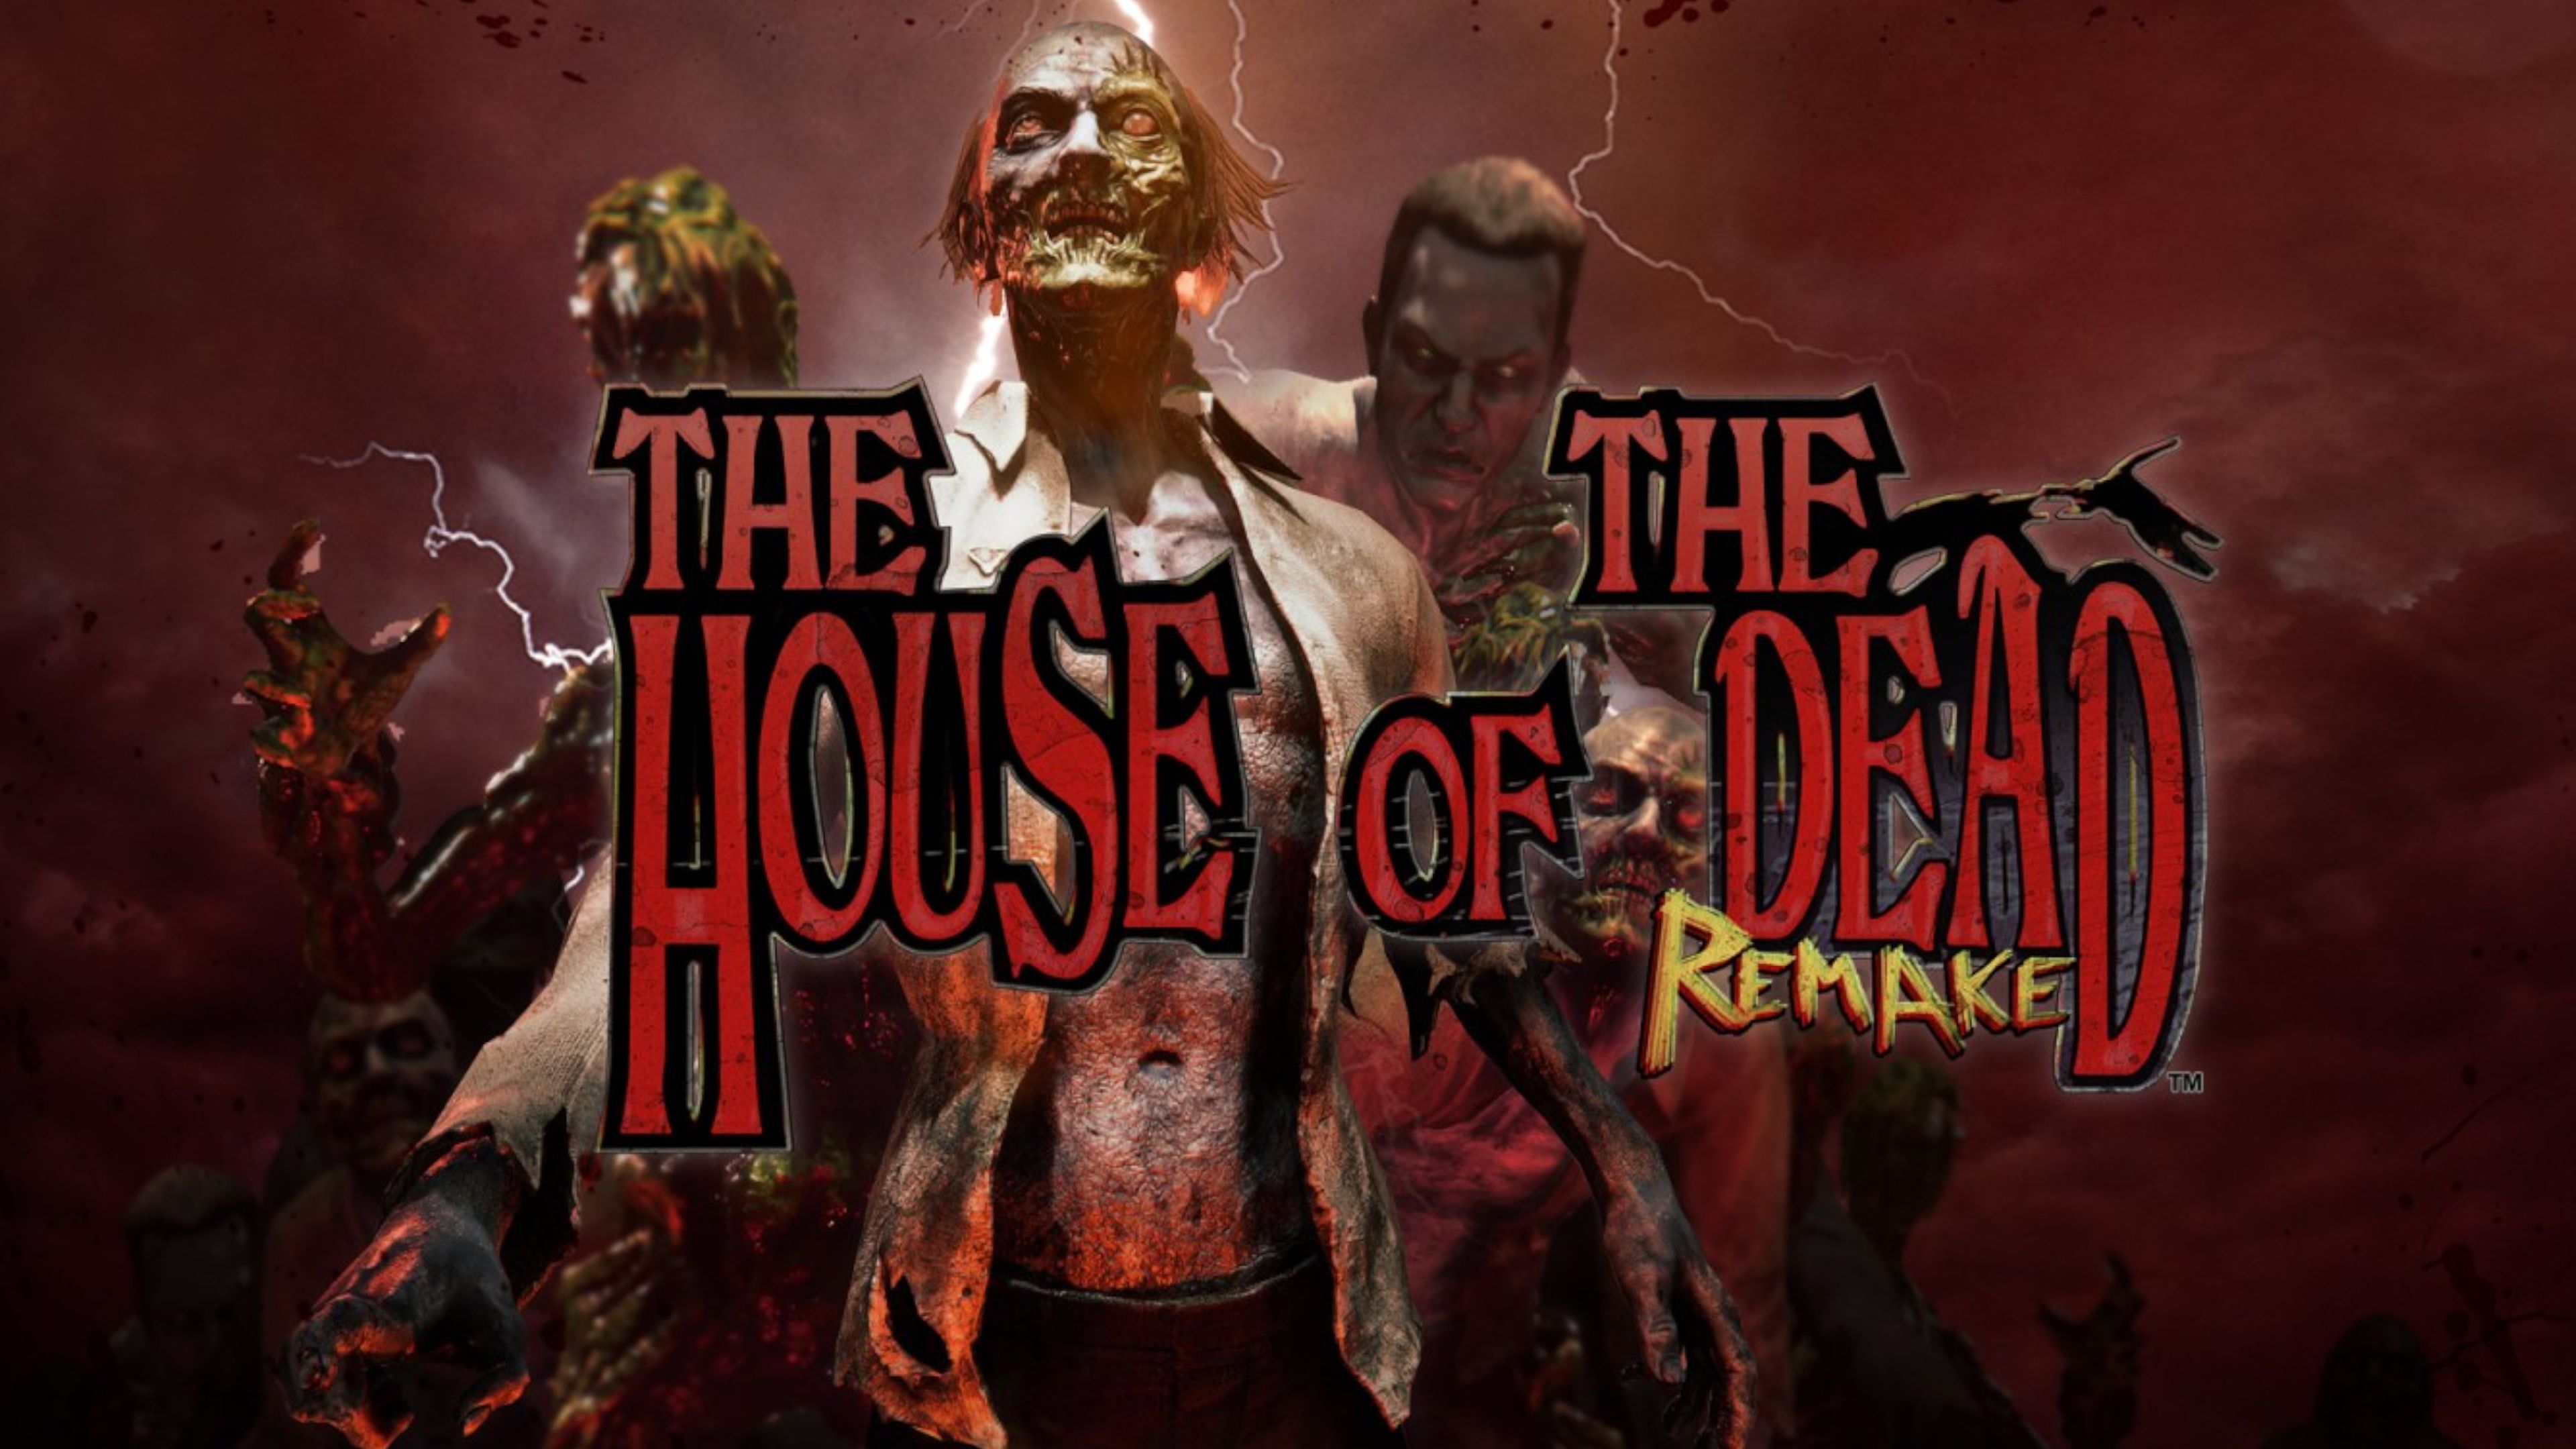 The House of the Dead remake